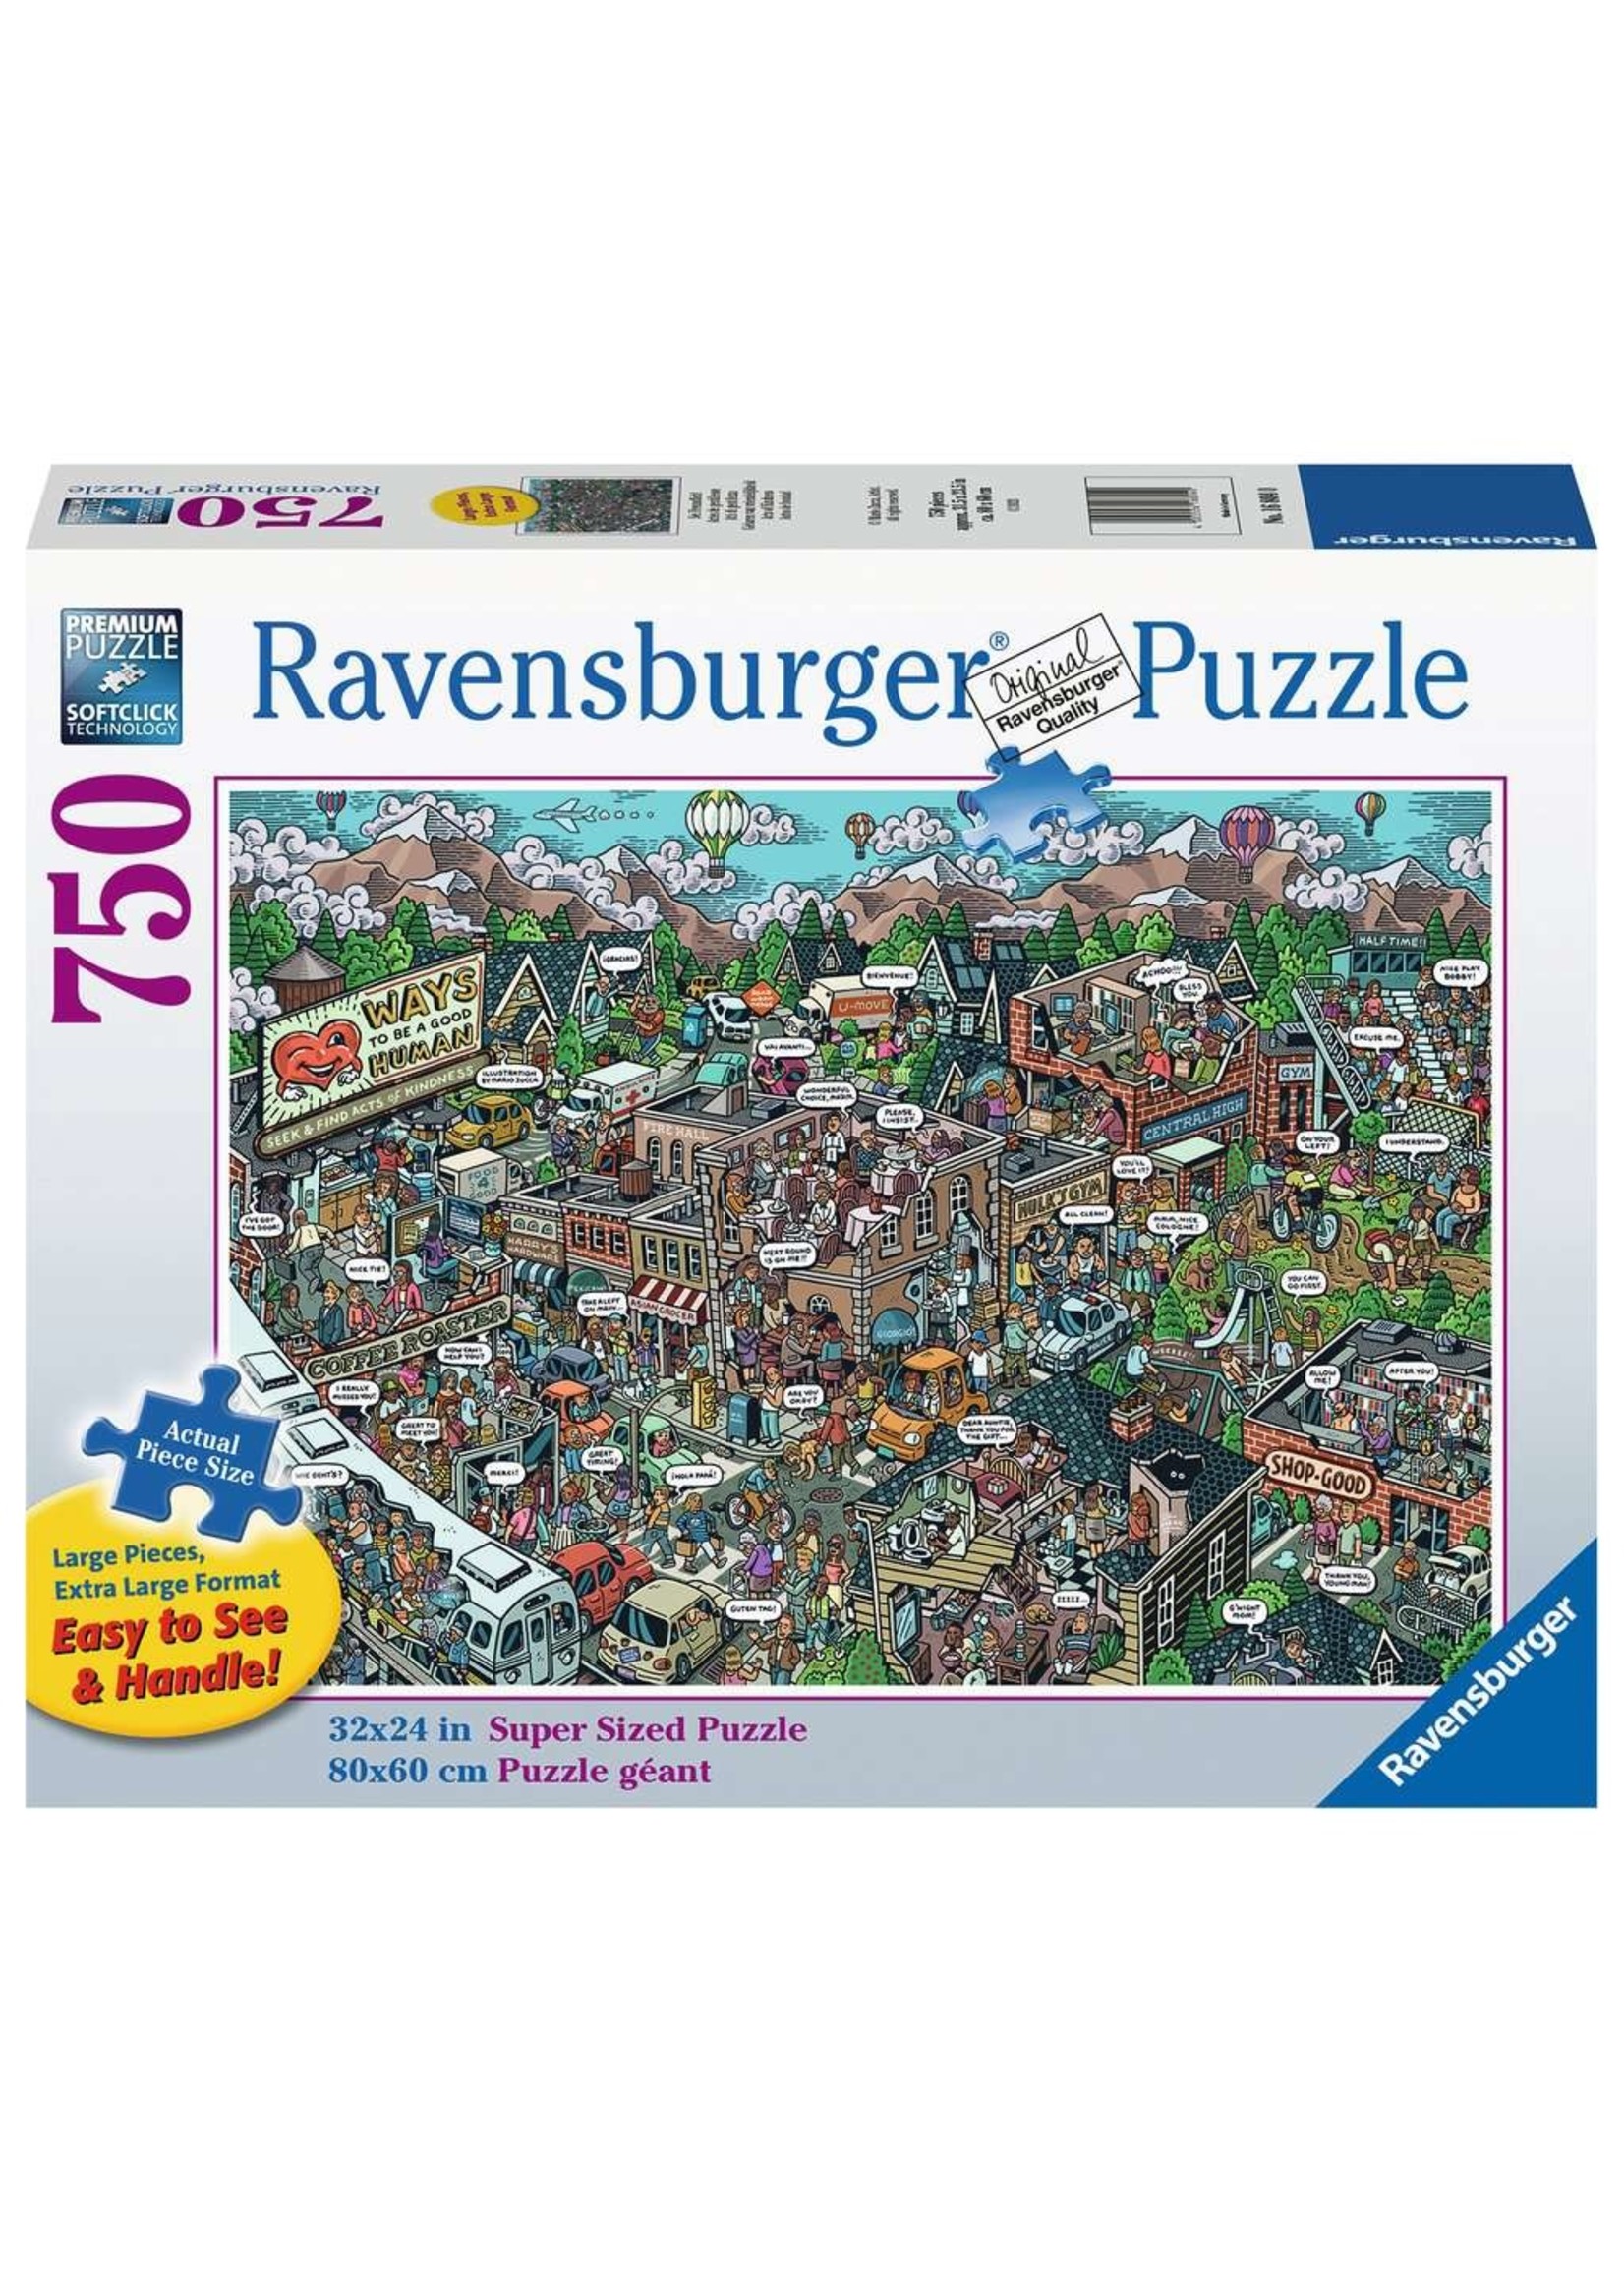 Ravensburger Acts of Kindness - 750 Piece Puzzle